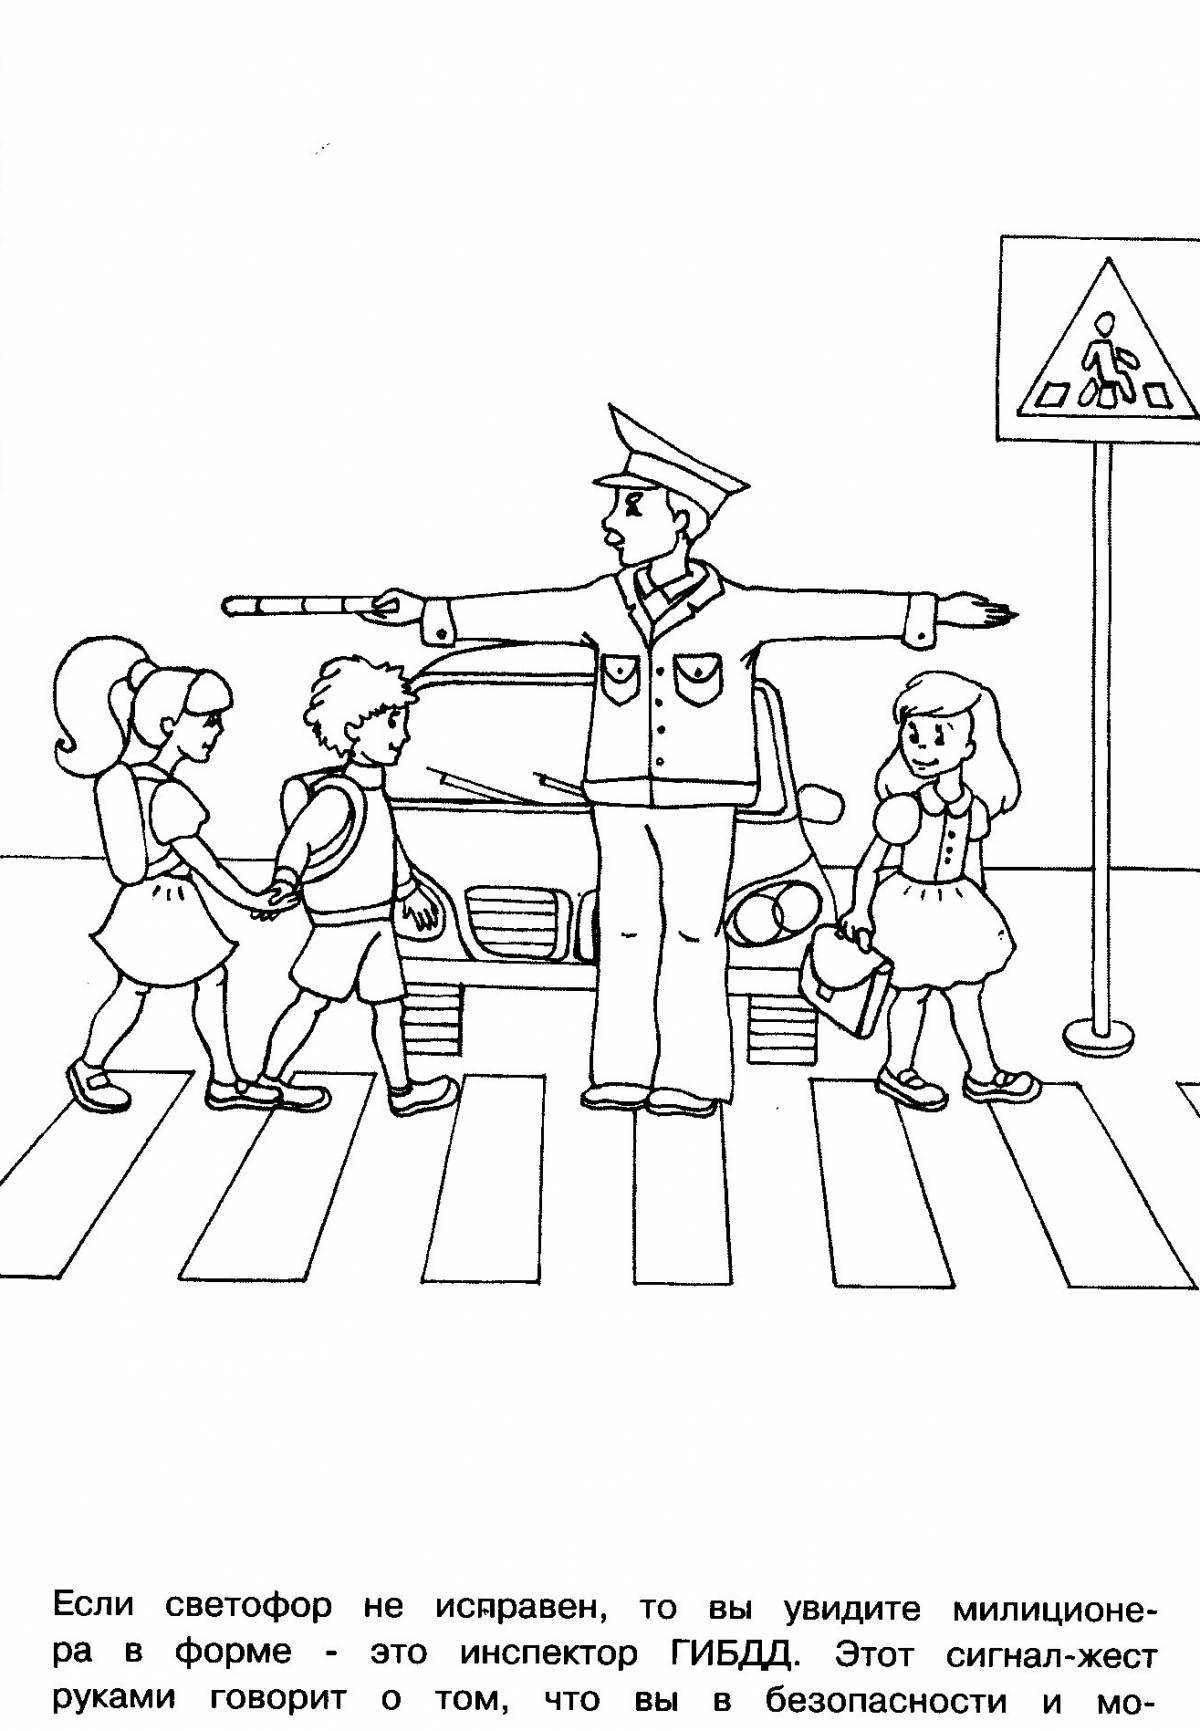 Colorful zebra crossing coloring page